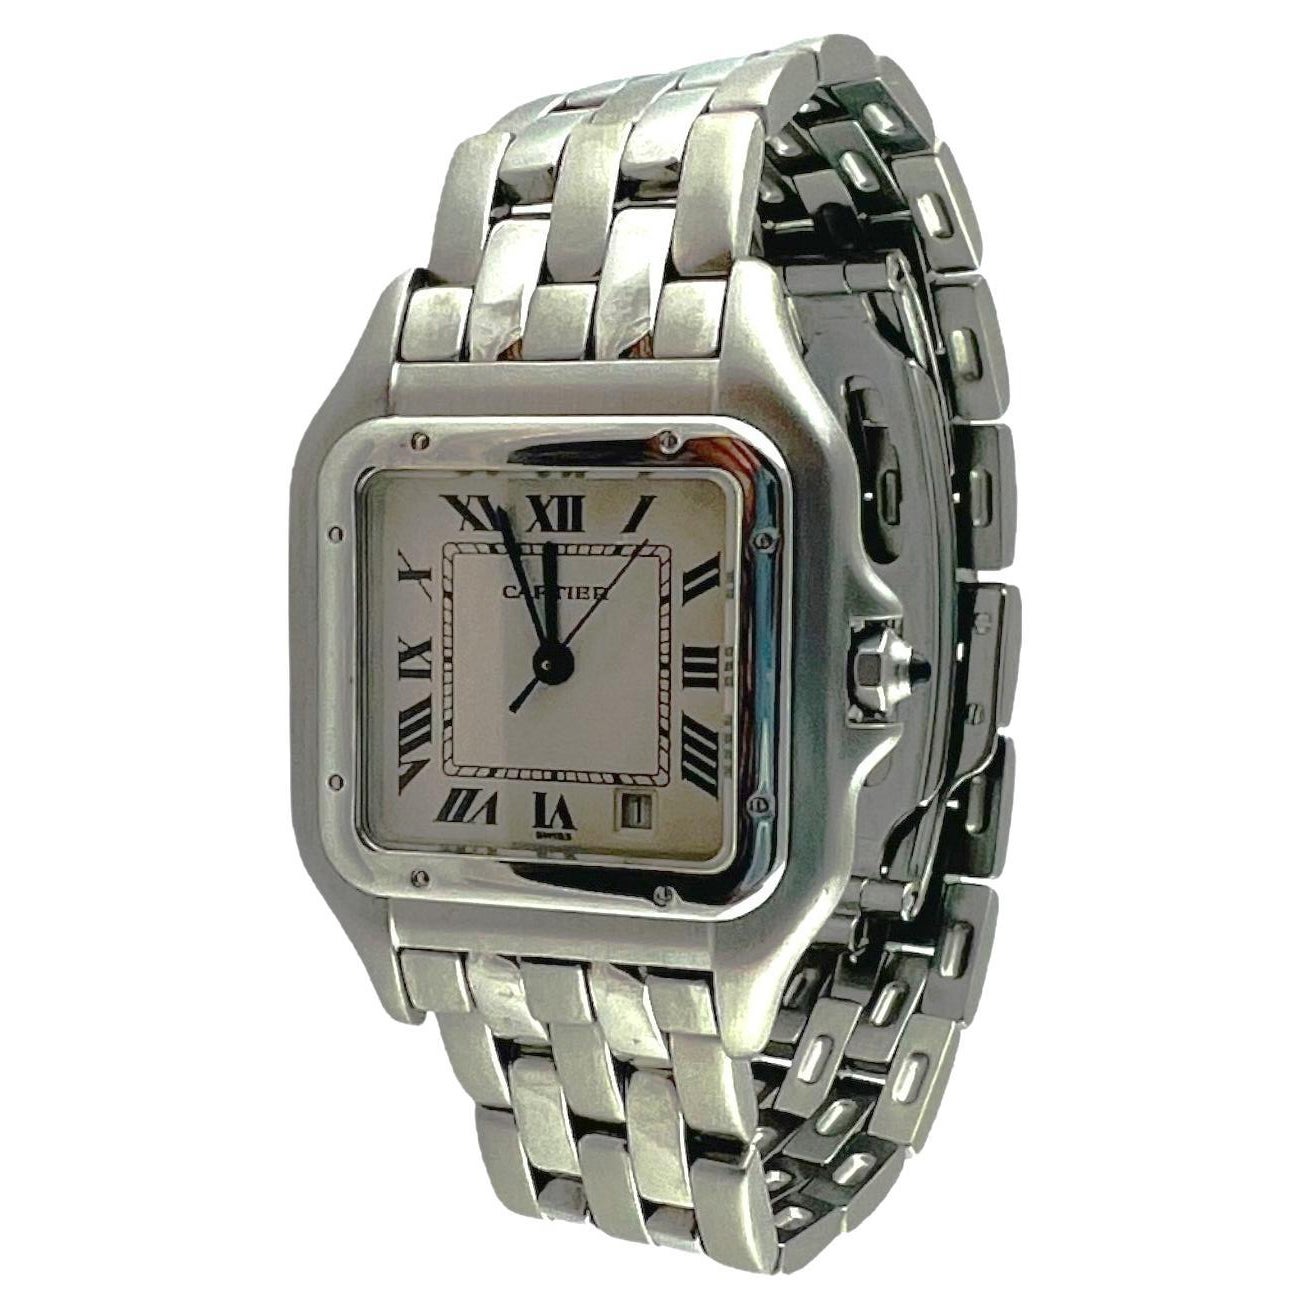 Cartier Panthere Stainless Steel Ladies Midsize Watch White Roman Dial 1310